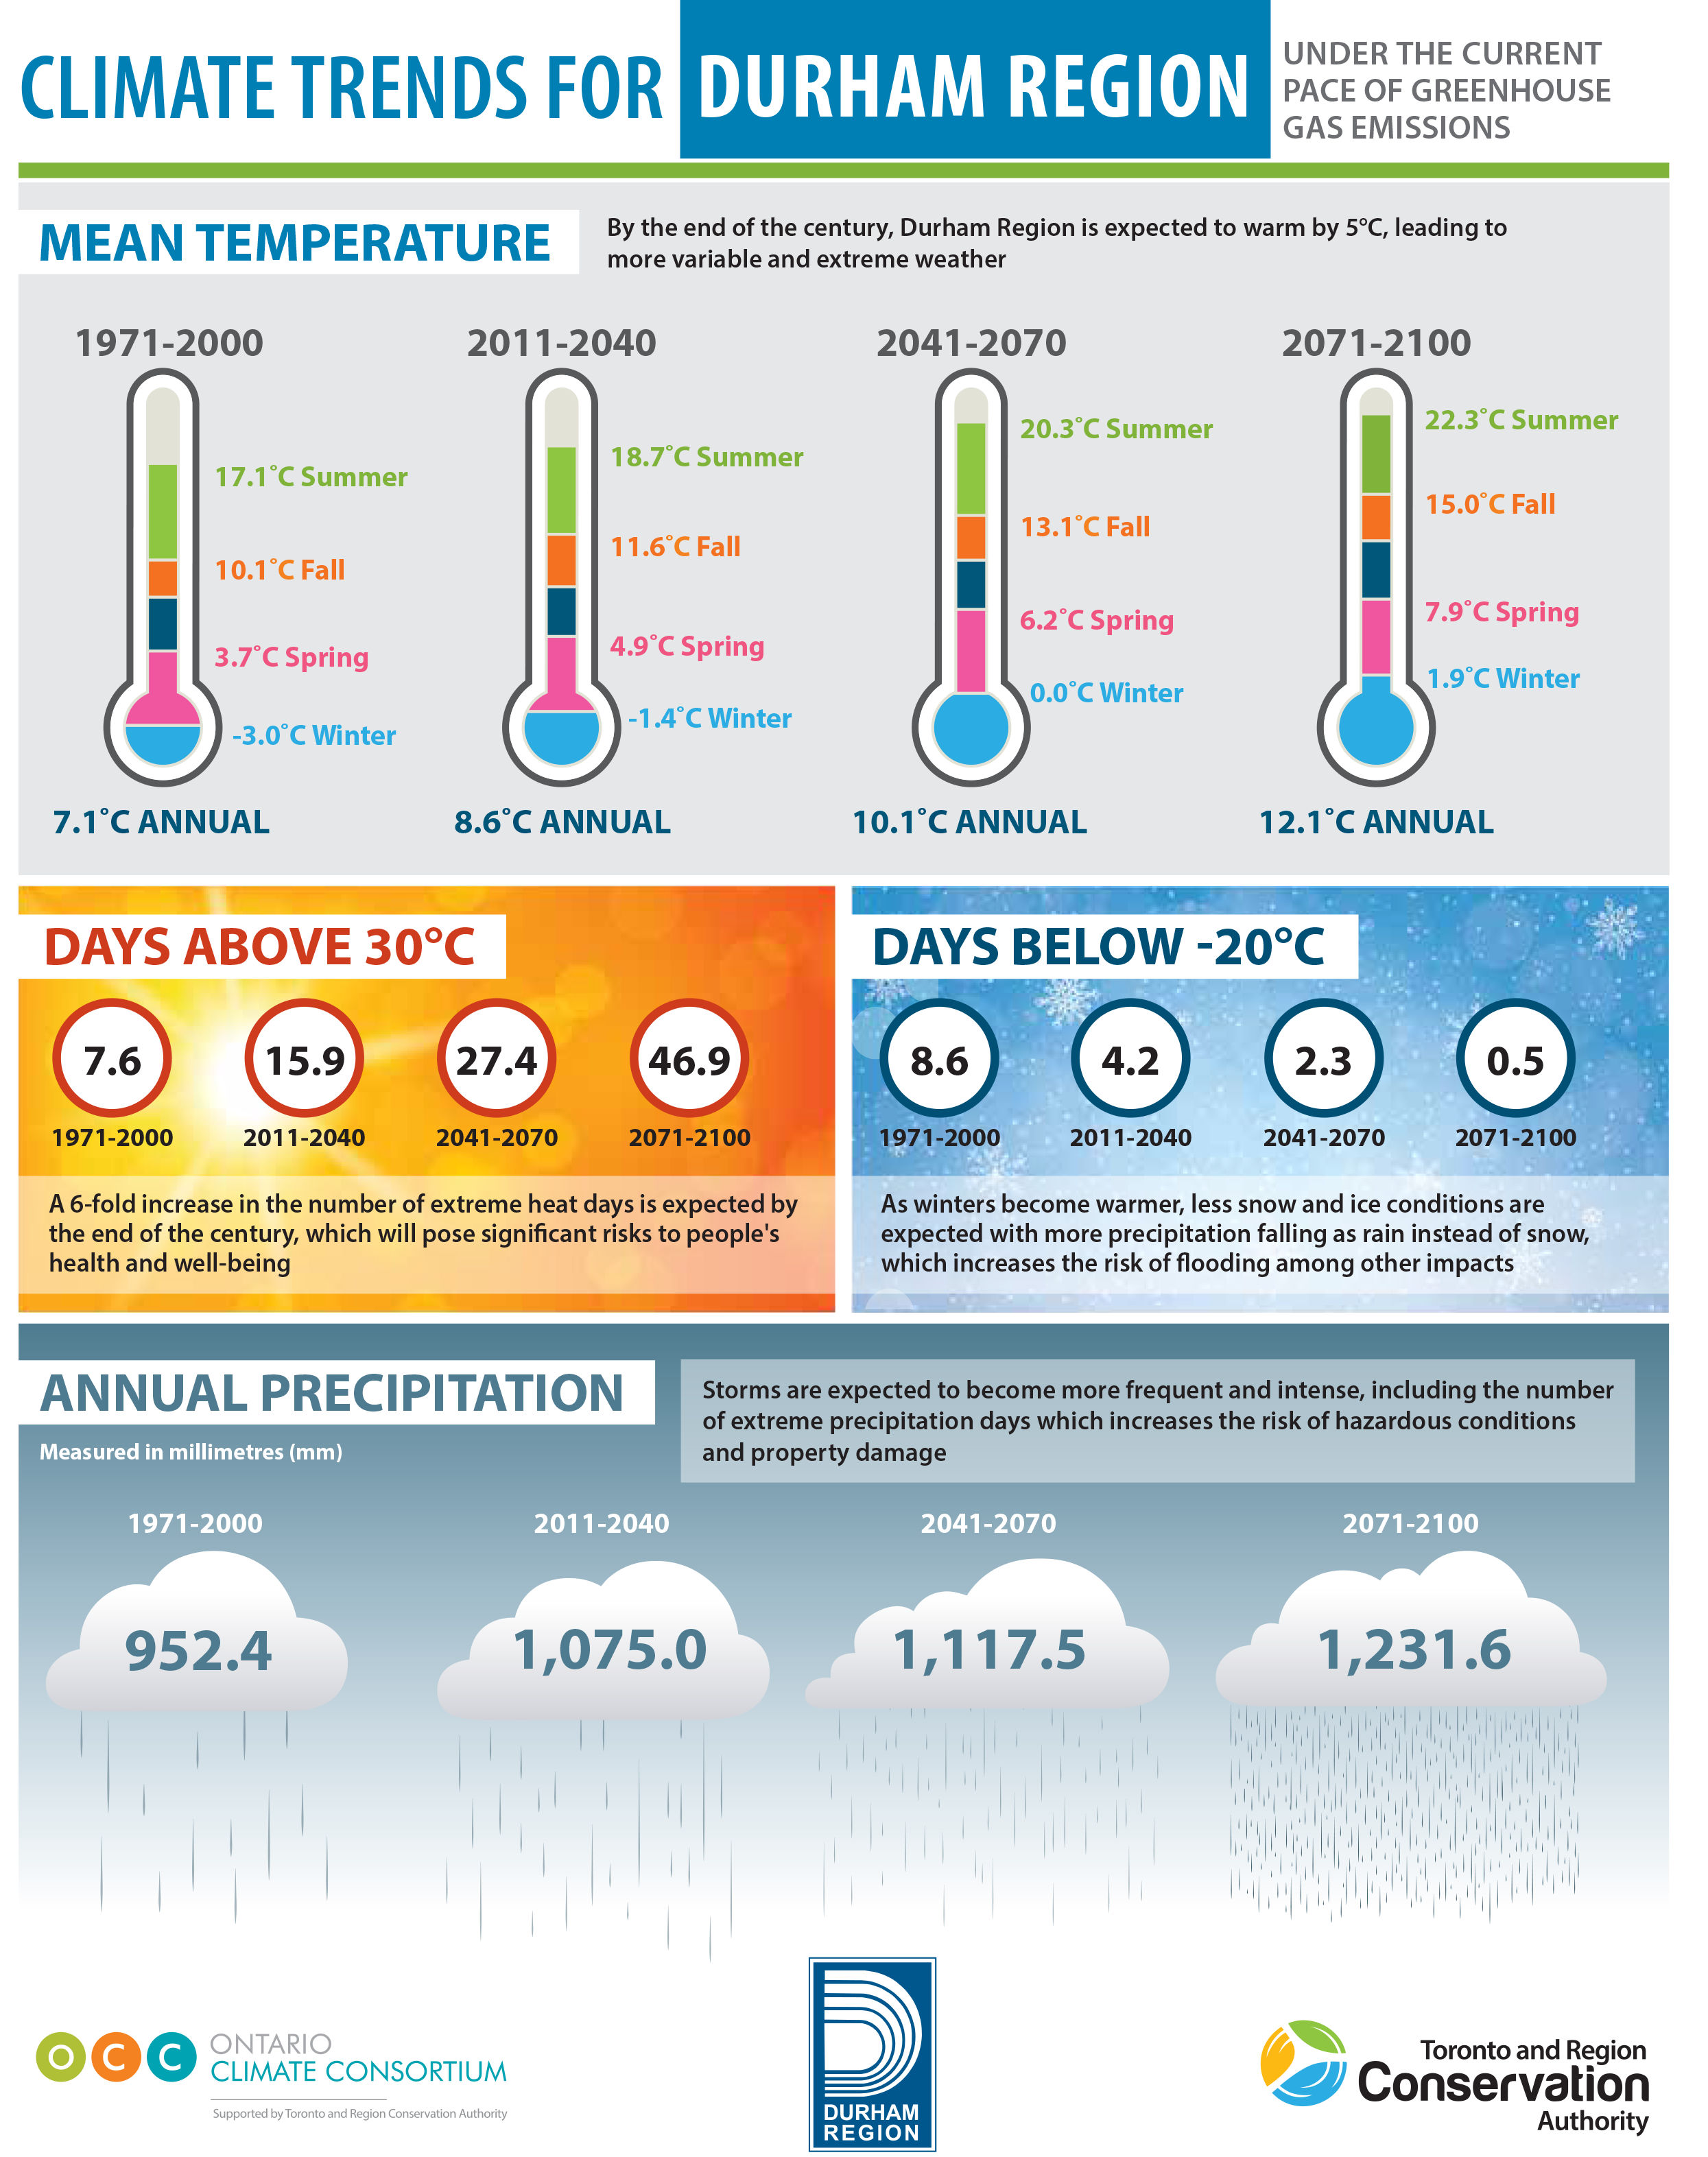 An infographic showing climate trends for Durham Region over the next few decades. This link will take you to the infographic.